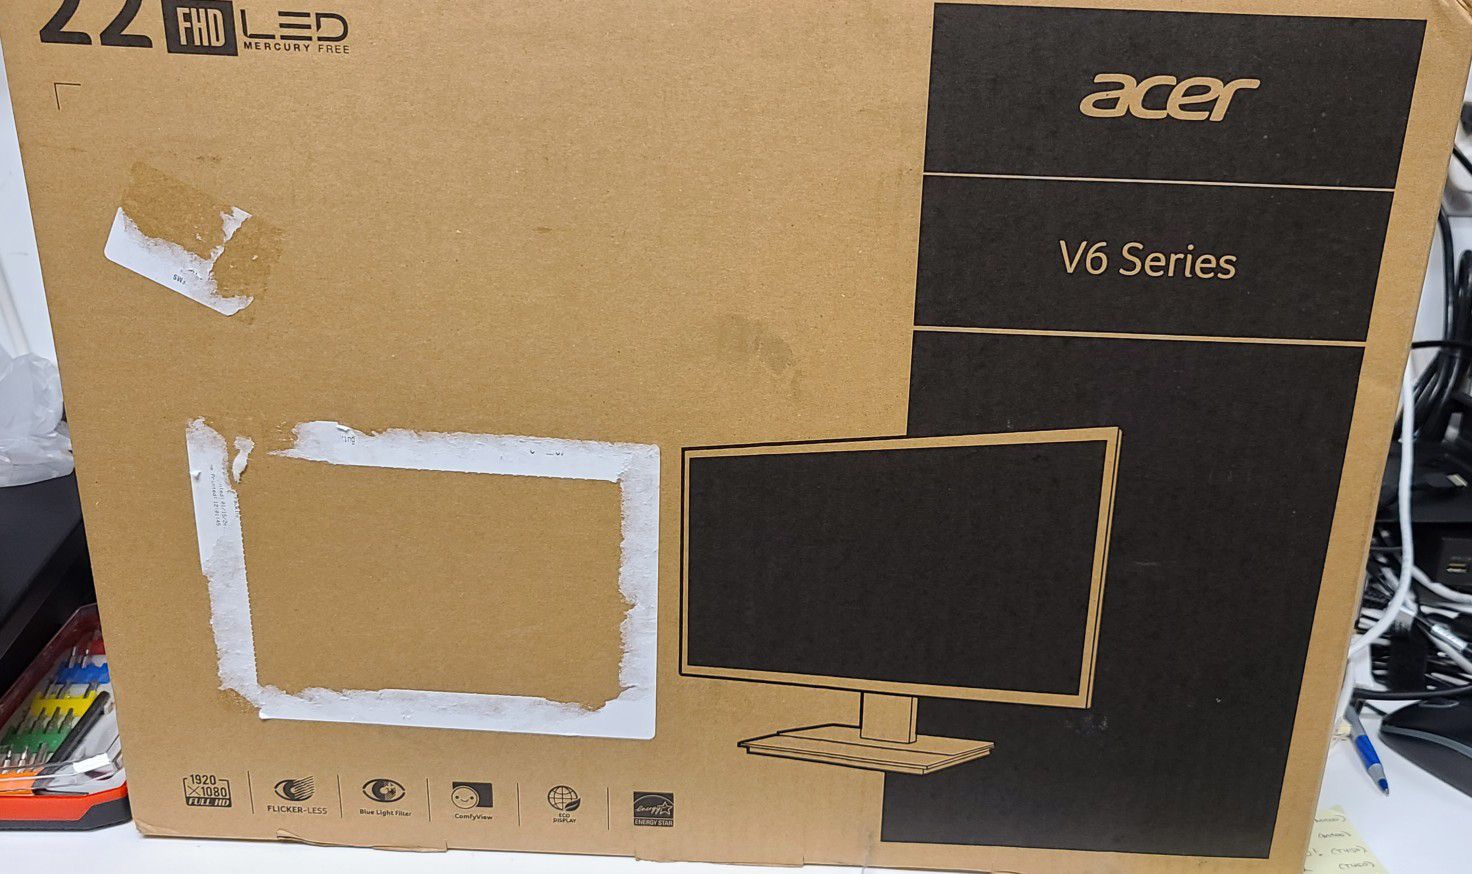 22" Acer FHD LED monitor